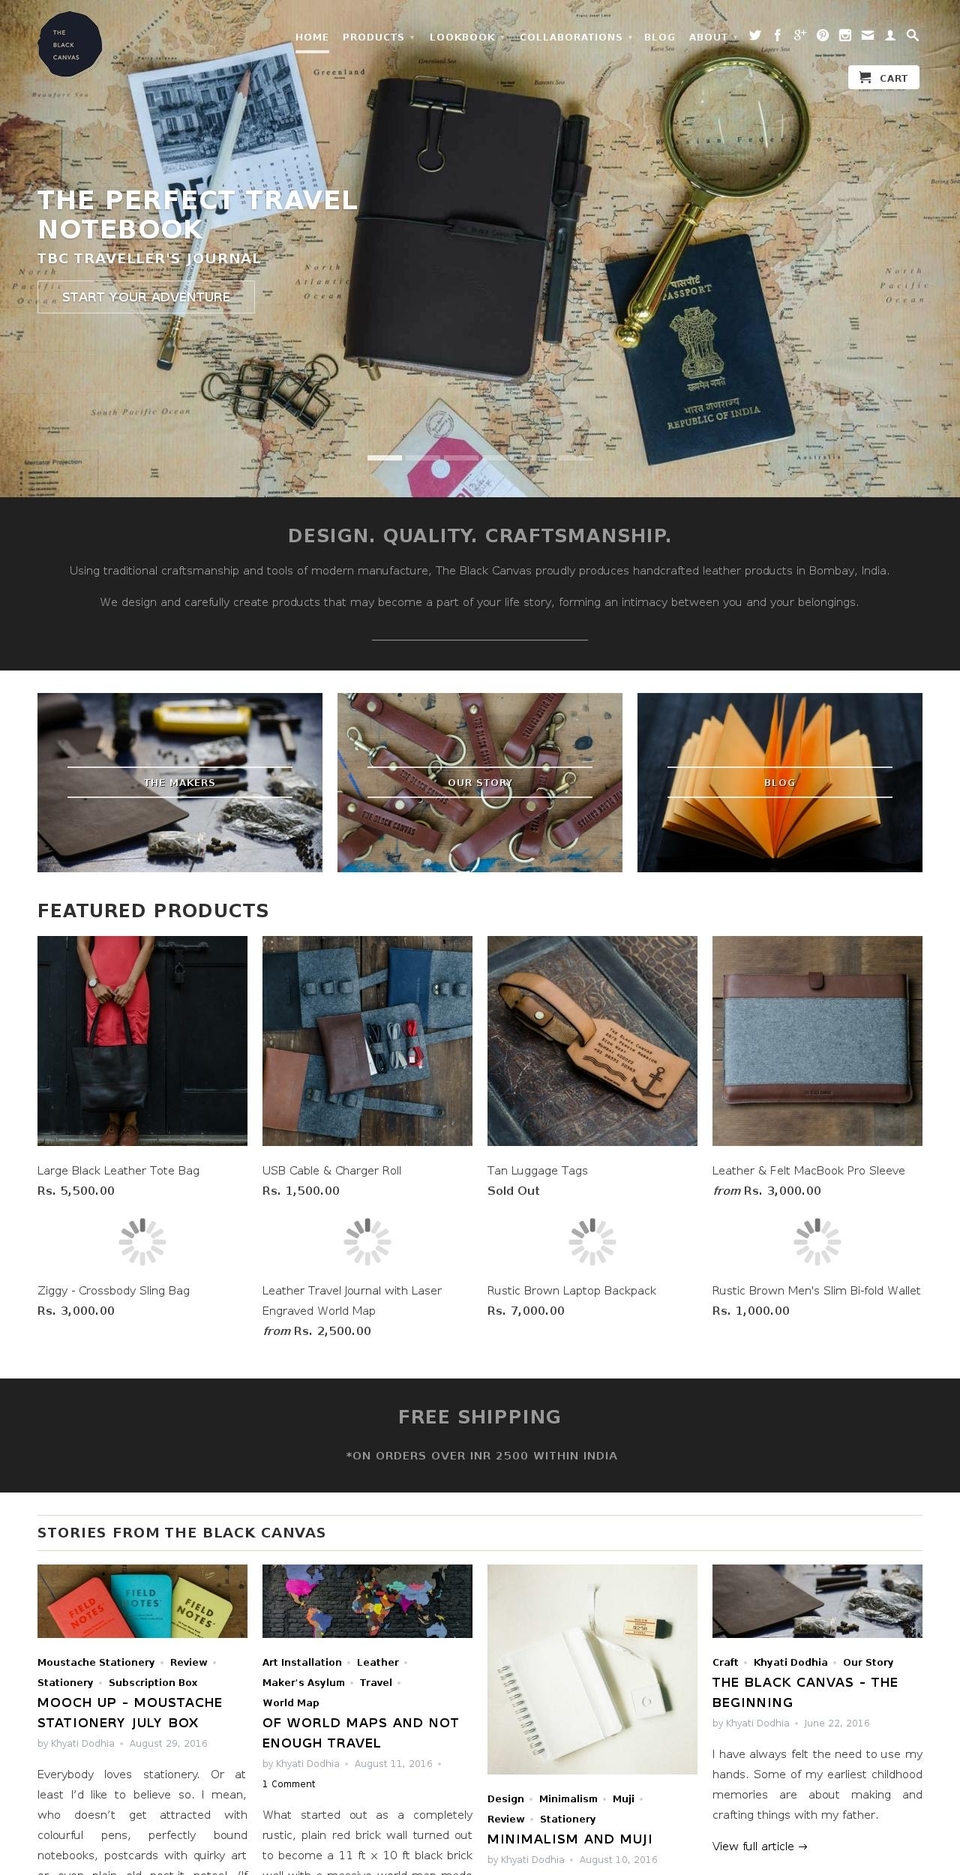 Broadcast Shopify theme site example theblackcanvas.in